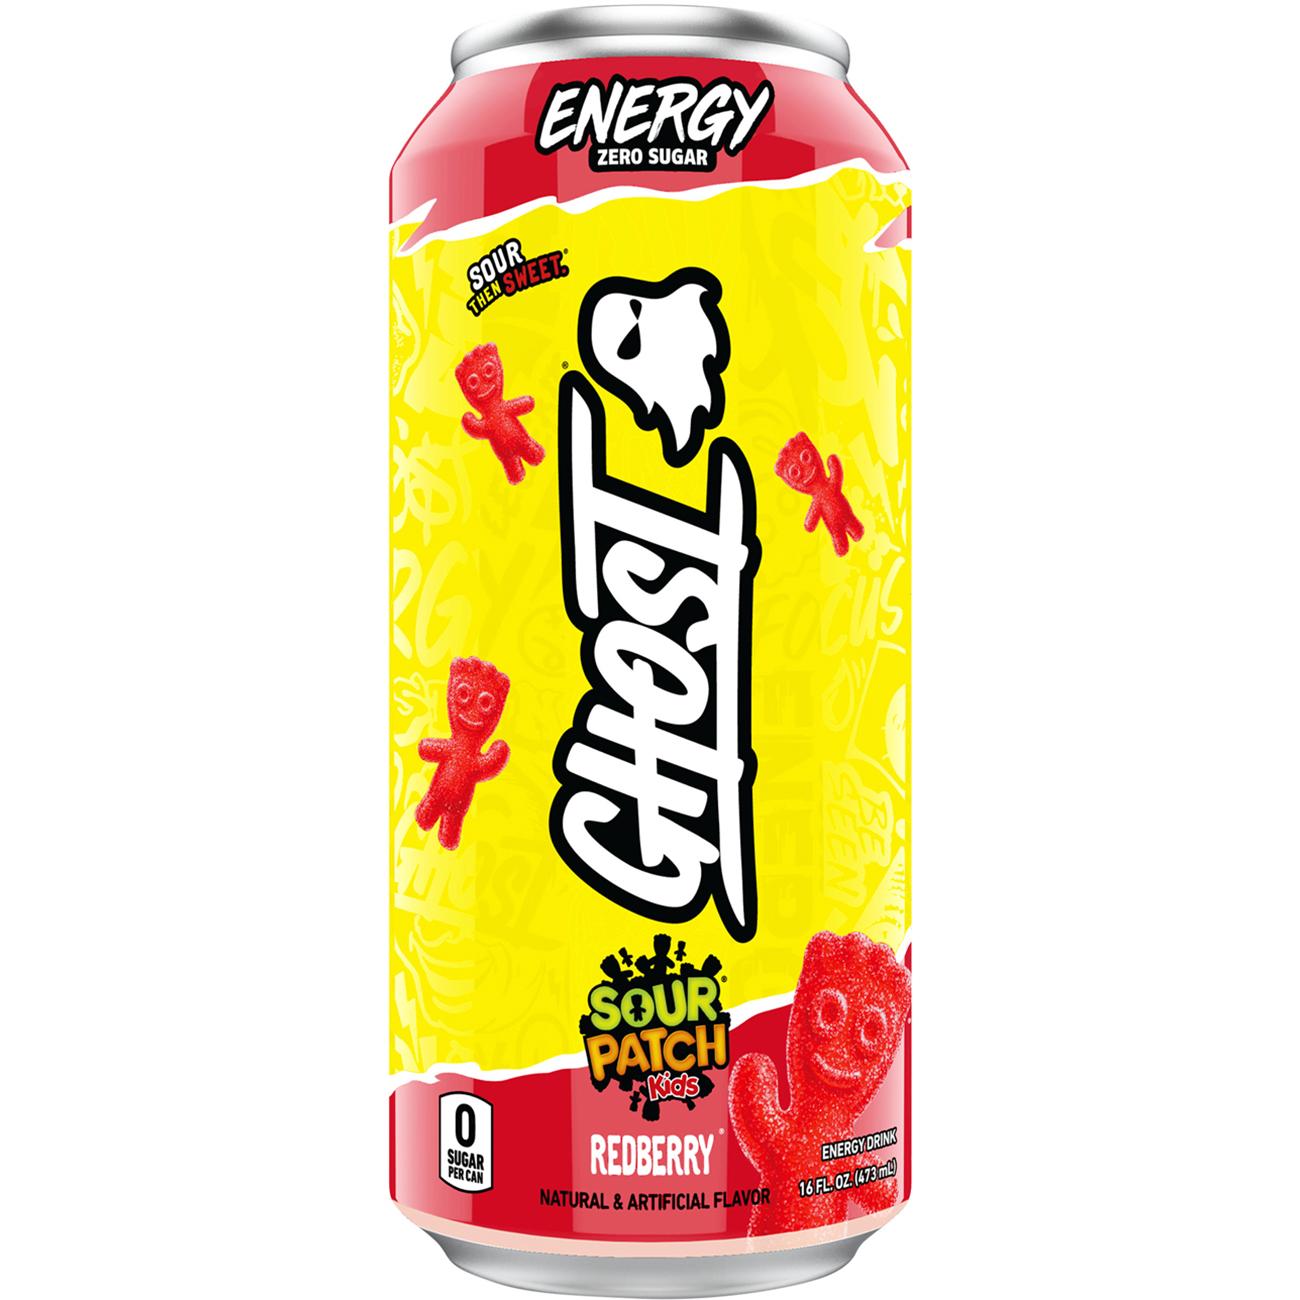 Ghost Energy Drink - Sour Patch Kids Redberry